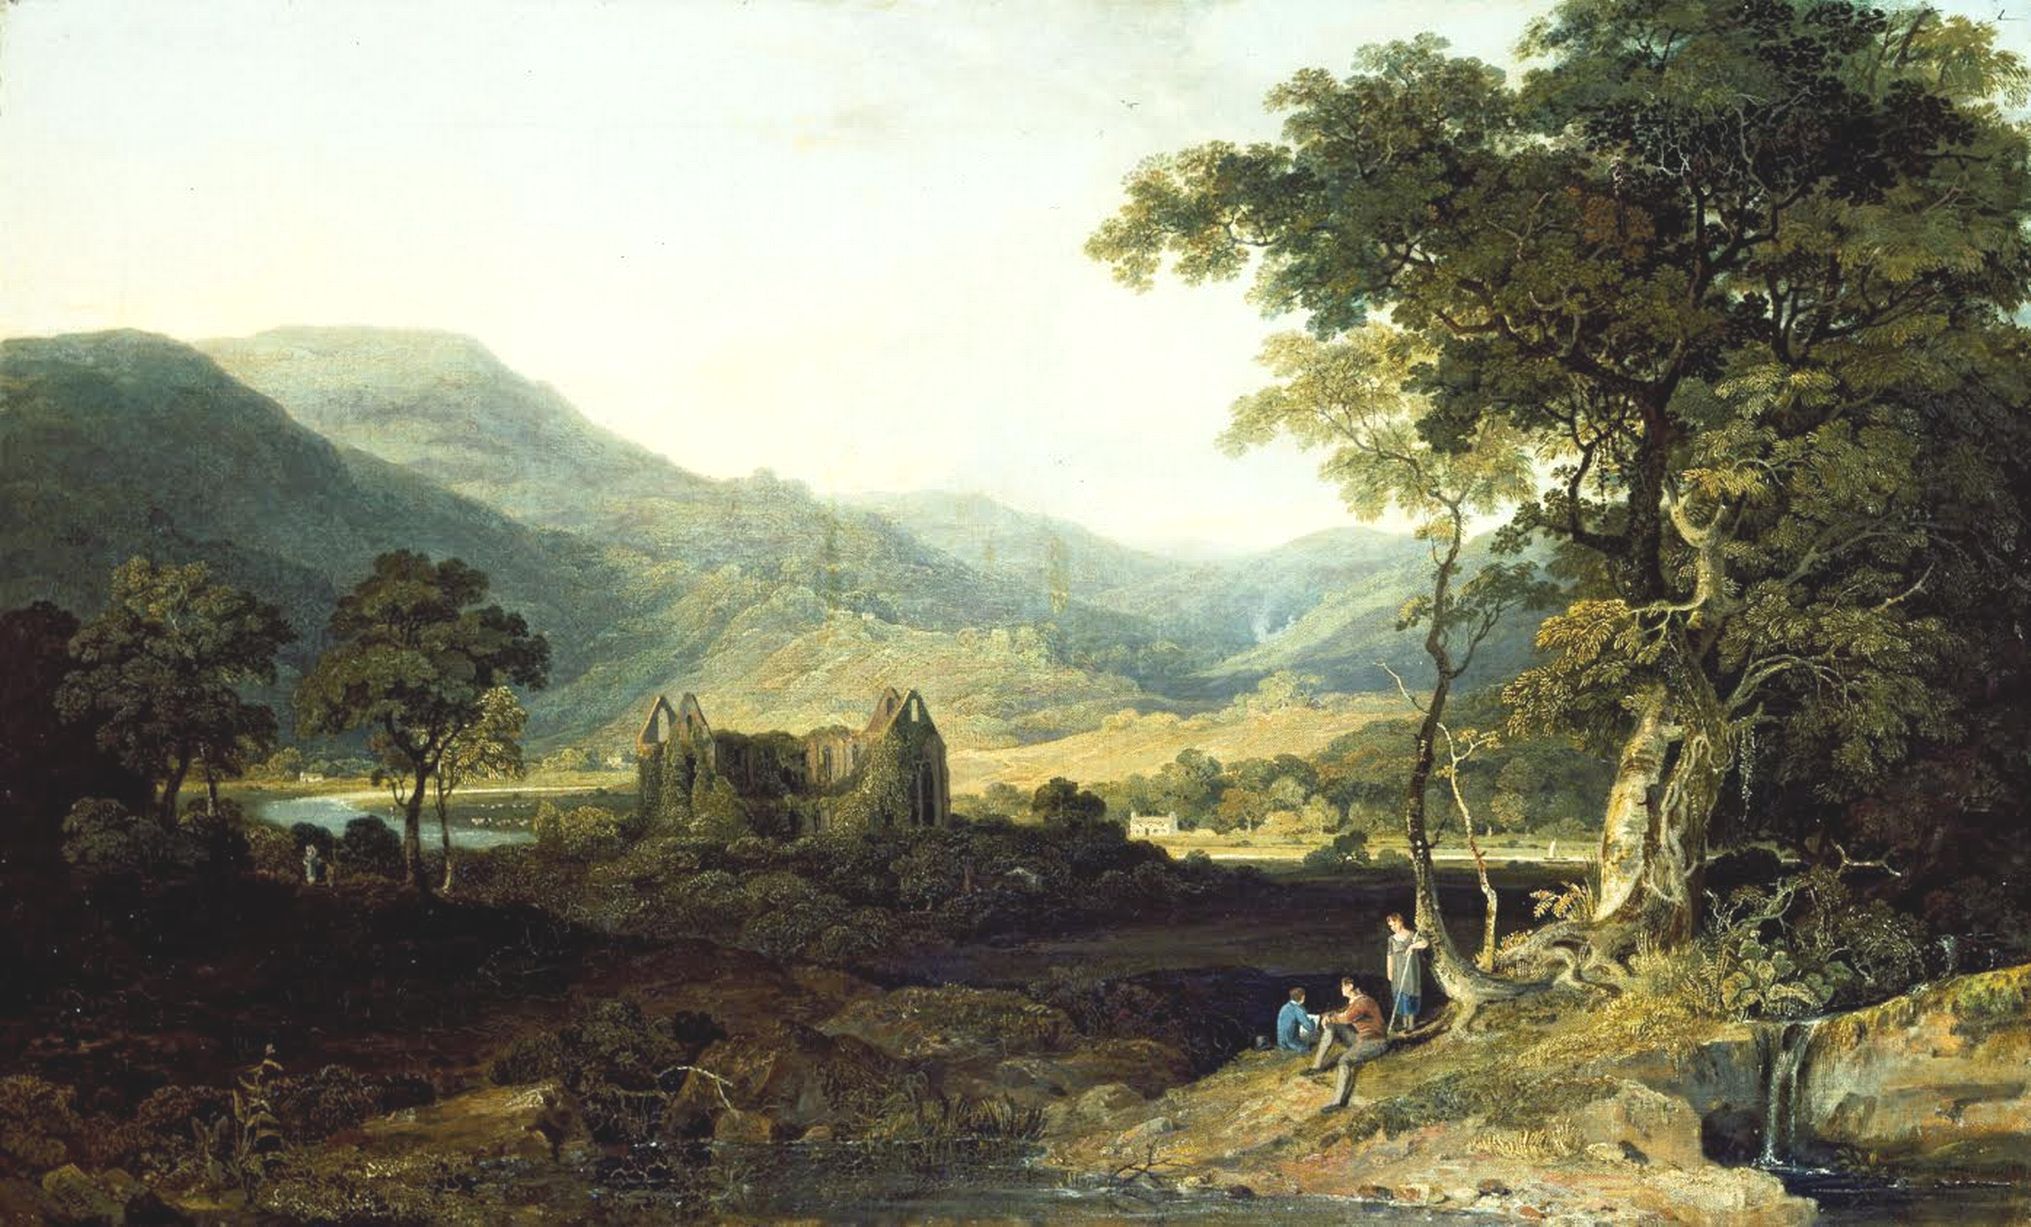 what is the first poem of lyrical ballads 1798 by wordsworth and coleridge